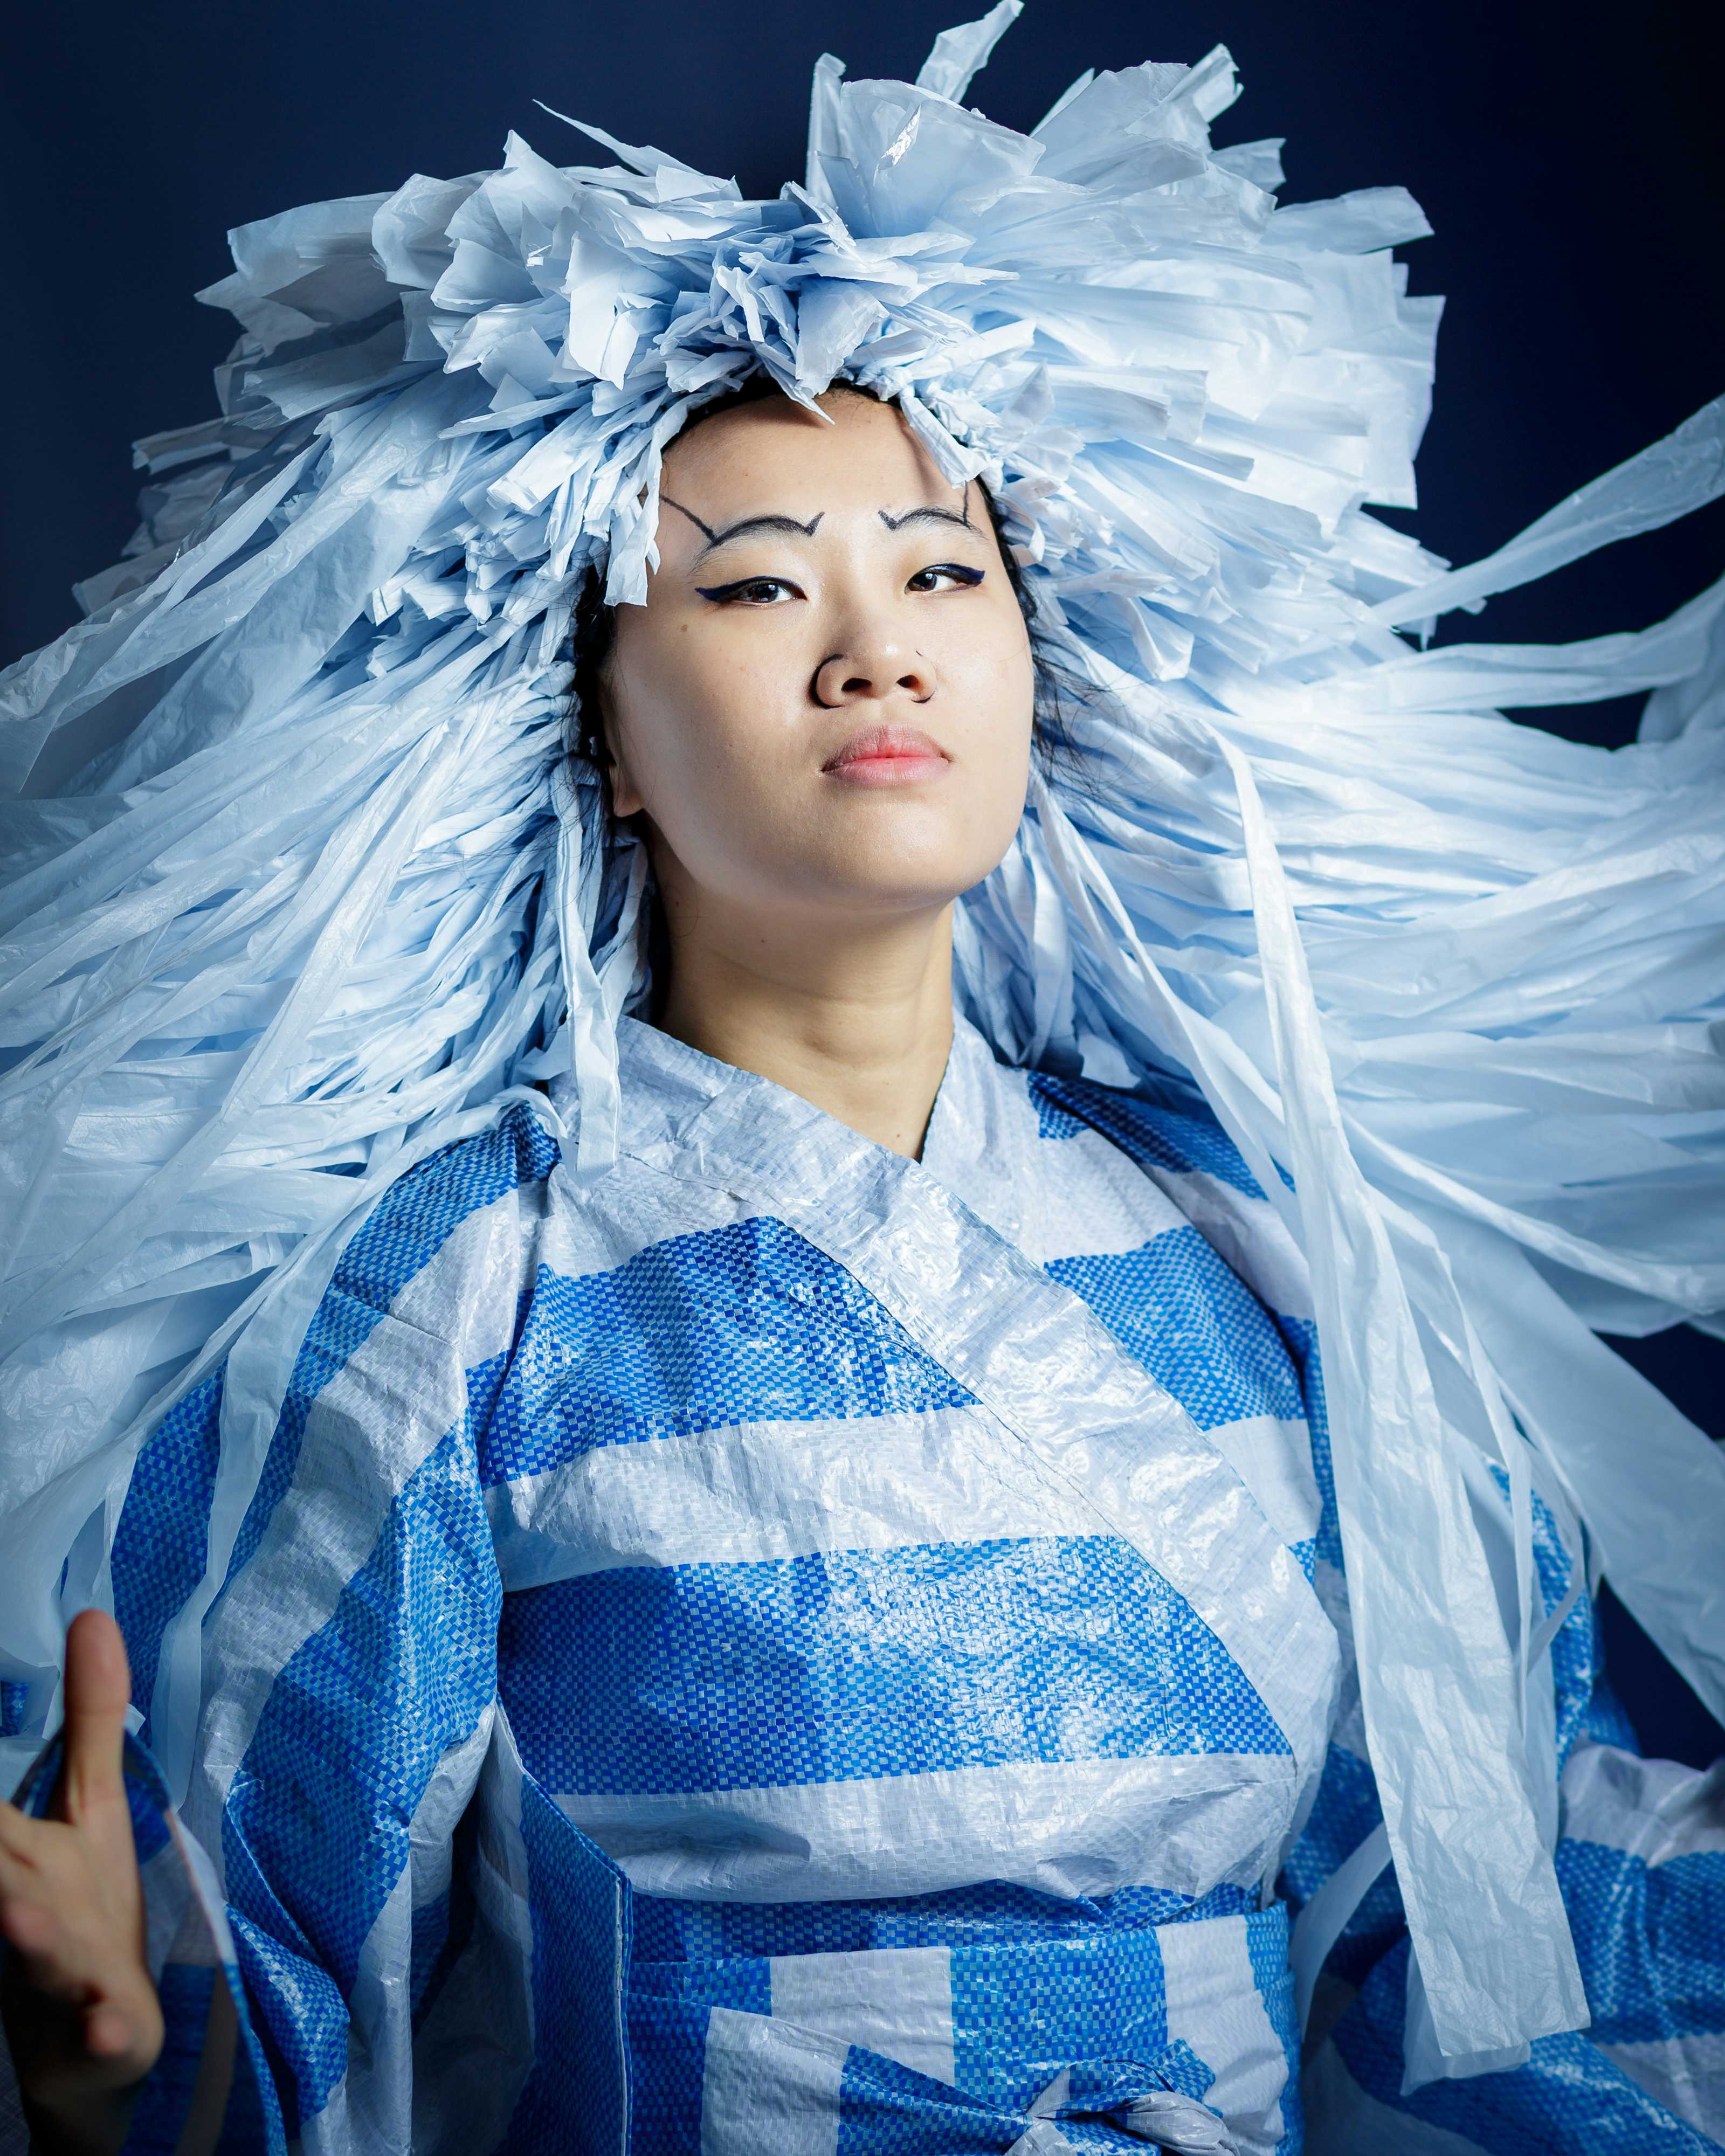 Superheroes Don't Give a Shit! | Featuring: Michelle Li | Tagged as: Headshot, Superheroes Don't Give a Sh*t! | Photo: Ivor Houlker |  (Rooftop Productions • Hong Kong Theatre Company)  | Rooftop Productions • Hong Kong Theatre Company